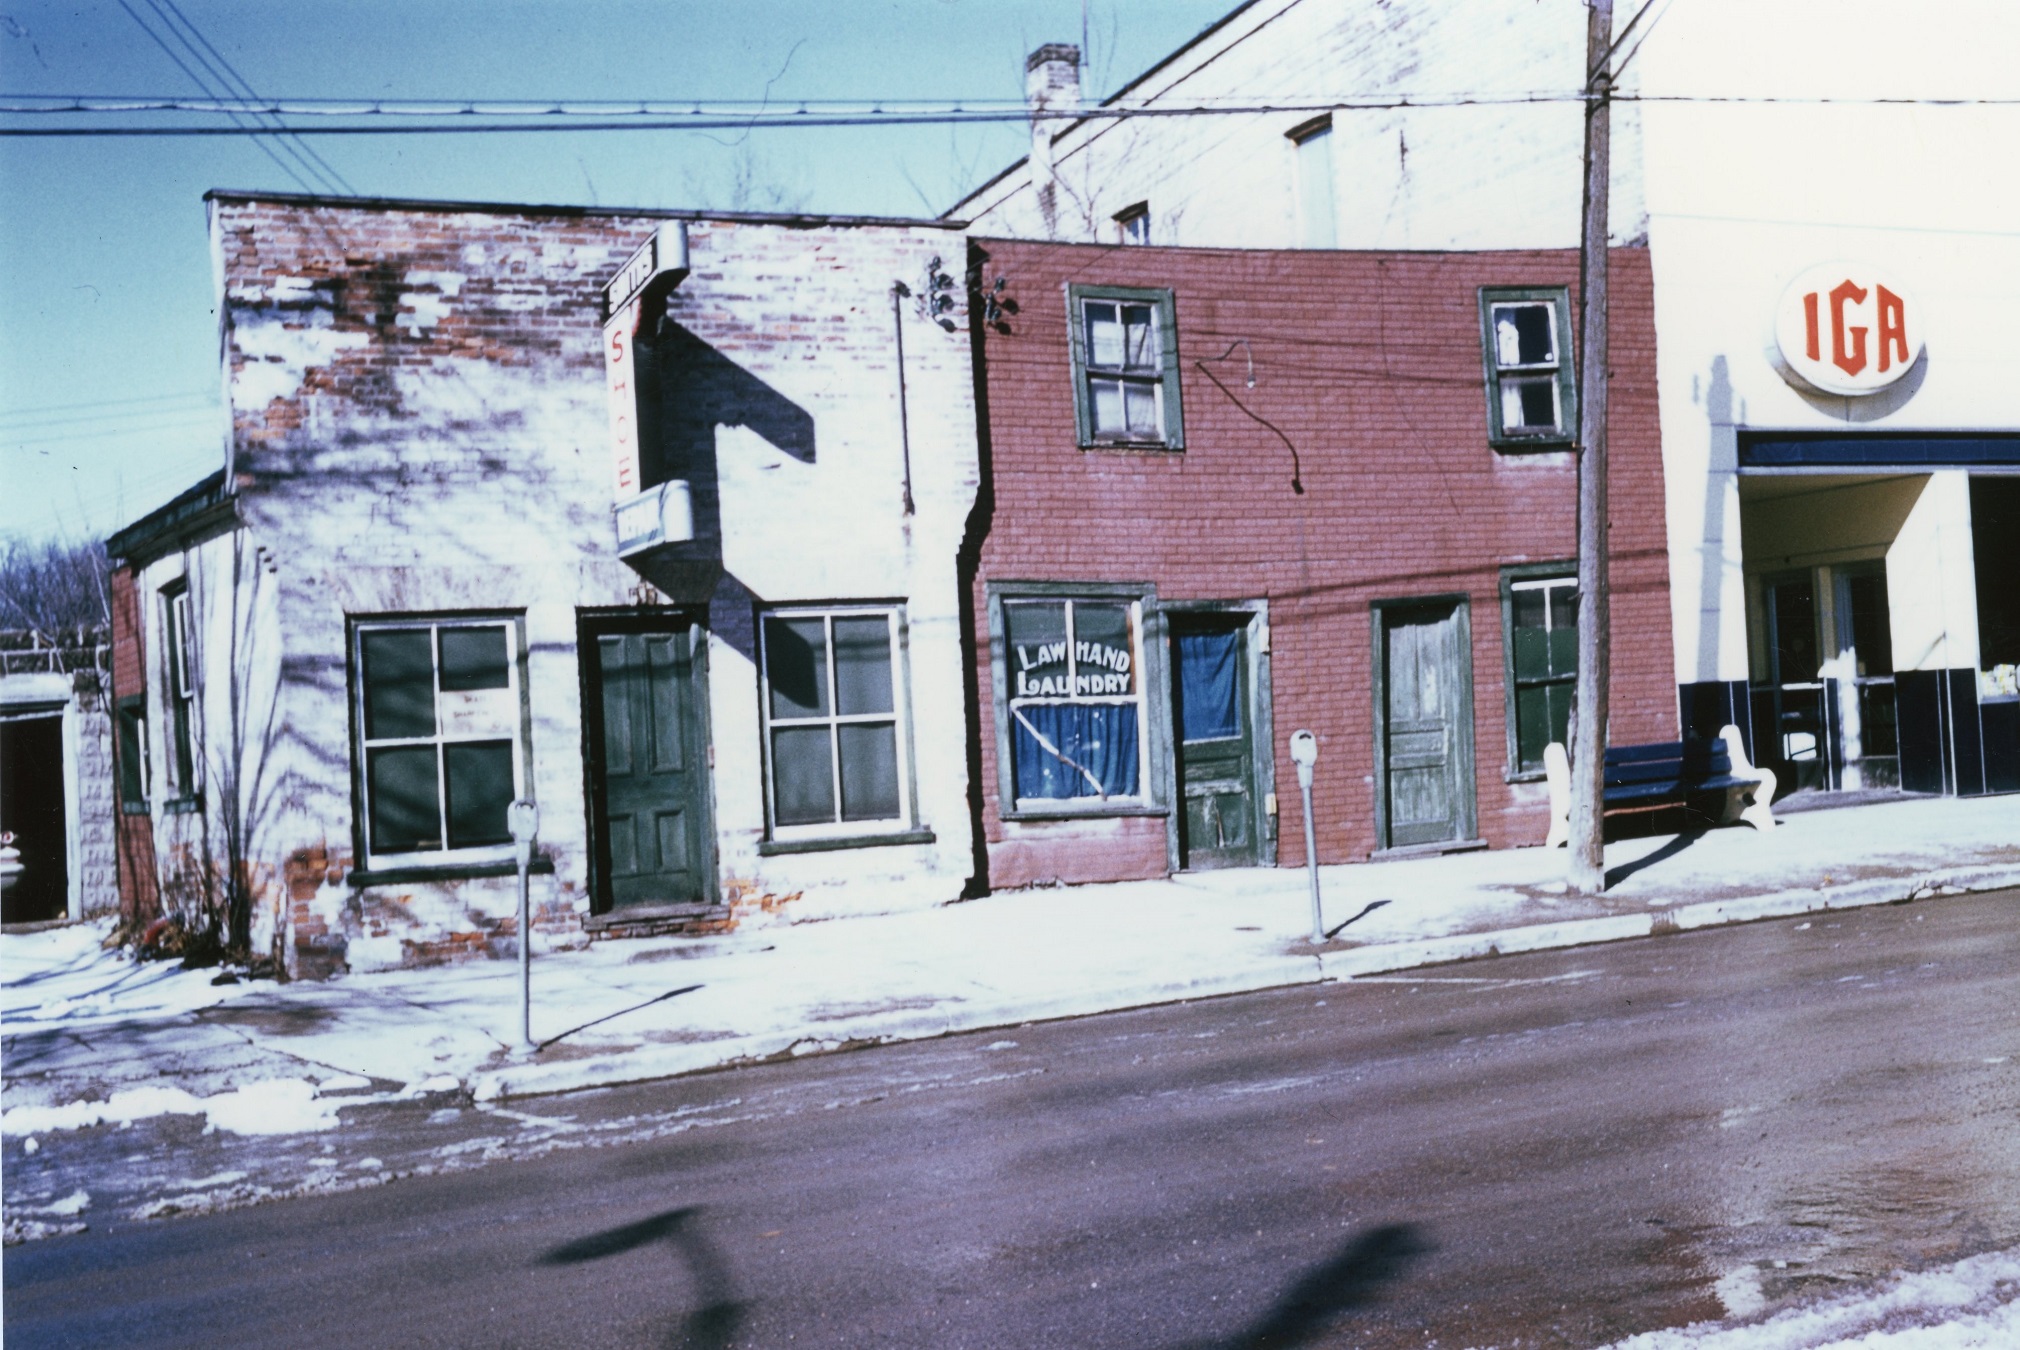 The red brick building in this photograph is Law Sum’s Laundry.